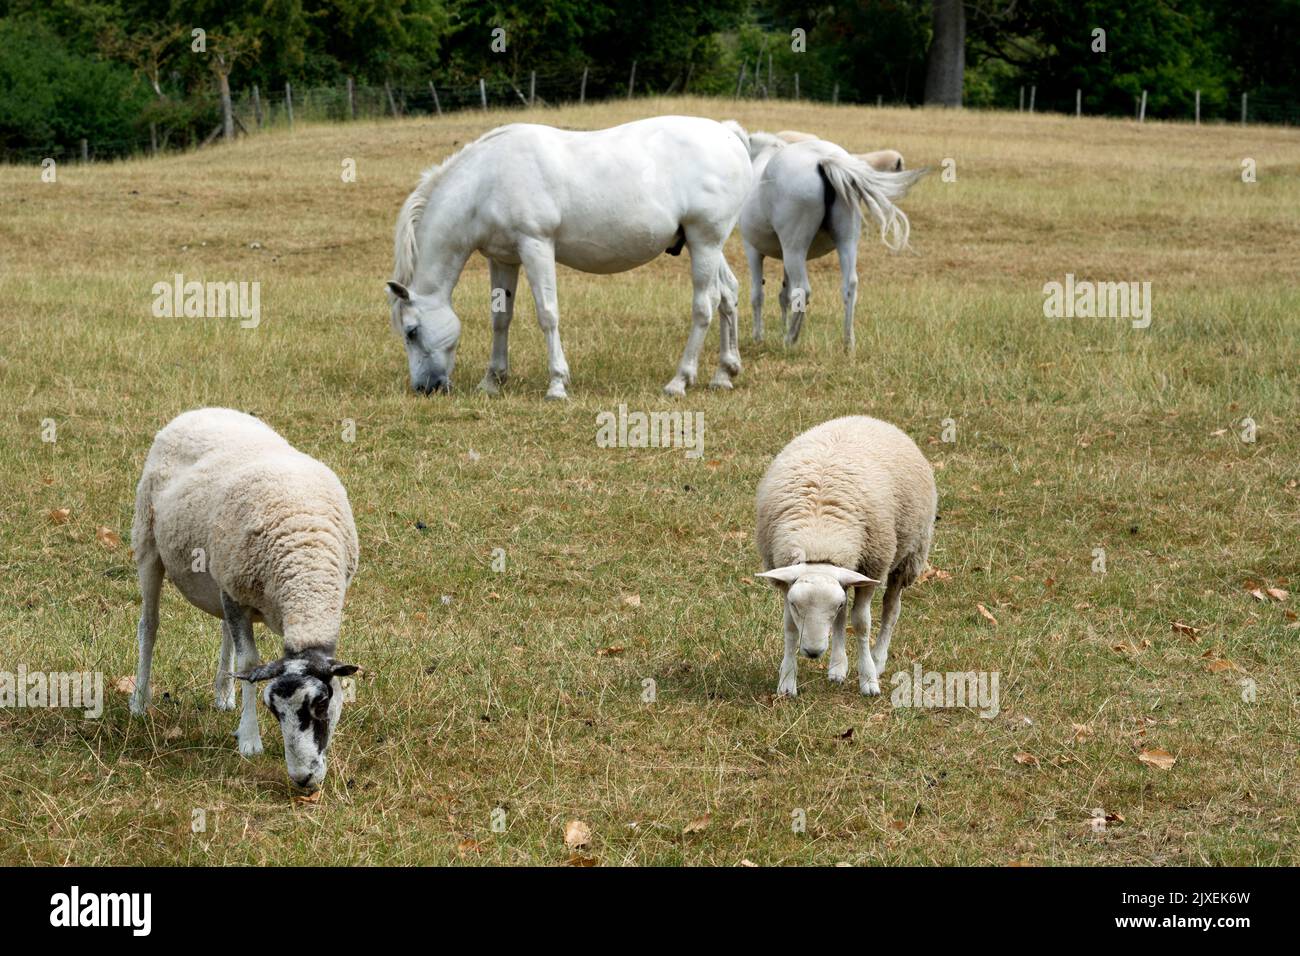 Sheep and horses grazing on dry grass during the 2022 heatwave, Warwickshire, UK Stock Photo